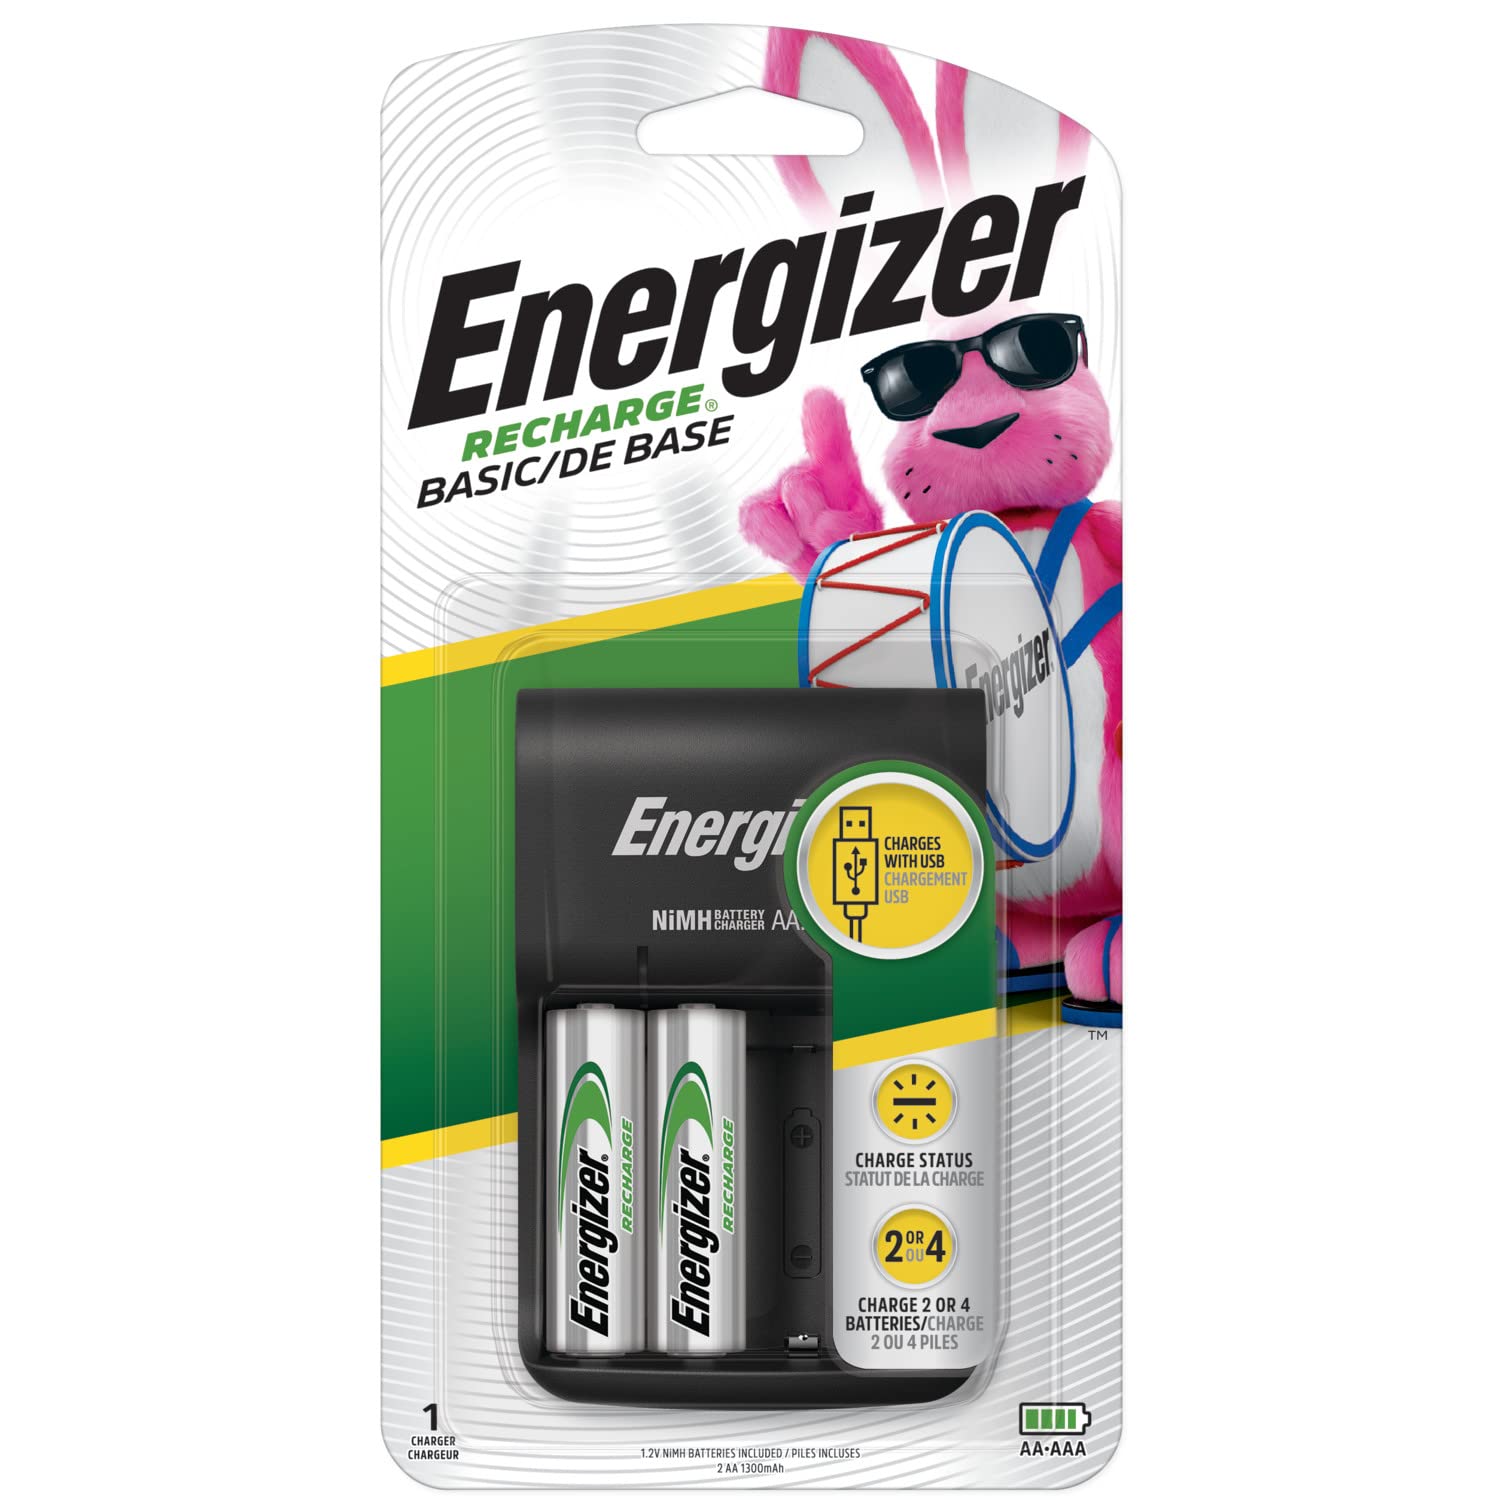 Energizer Recharge, Basic Charger for Rechargeable Batteries, 1 Count